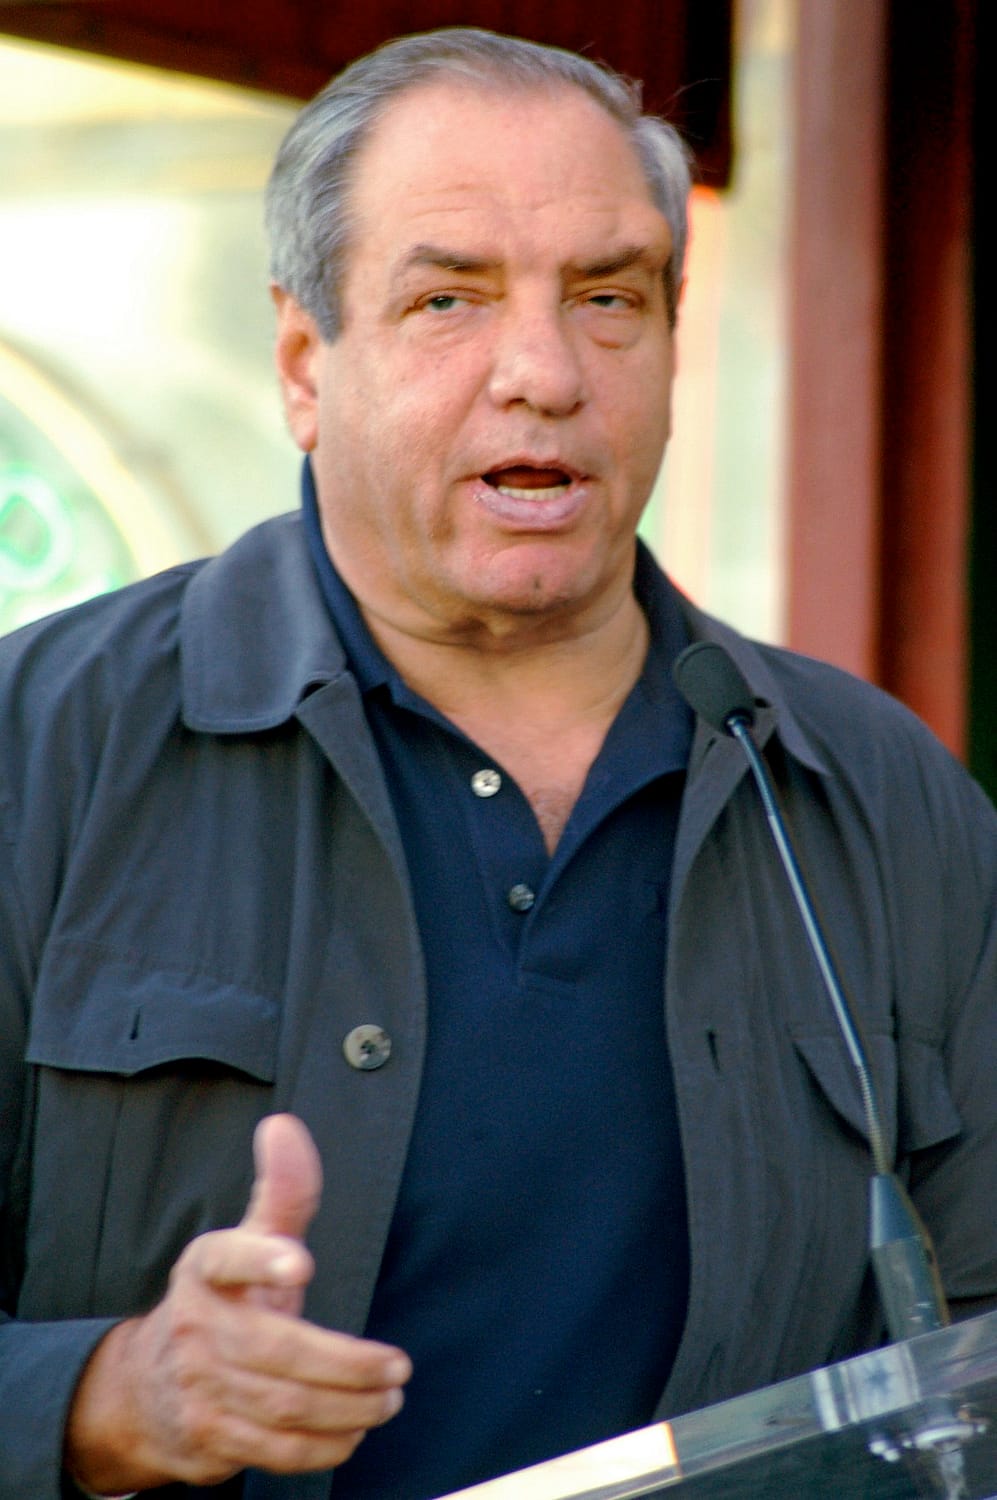 Dick Wolf's career, personal life, and net worth